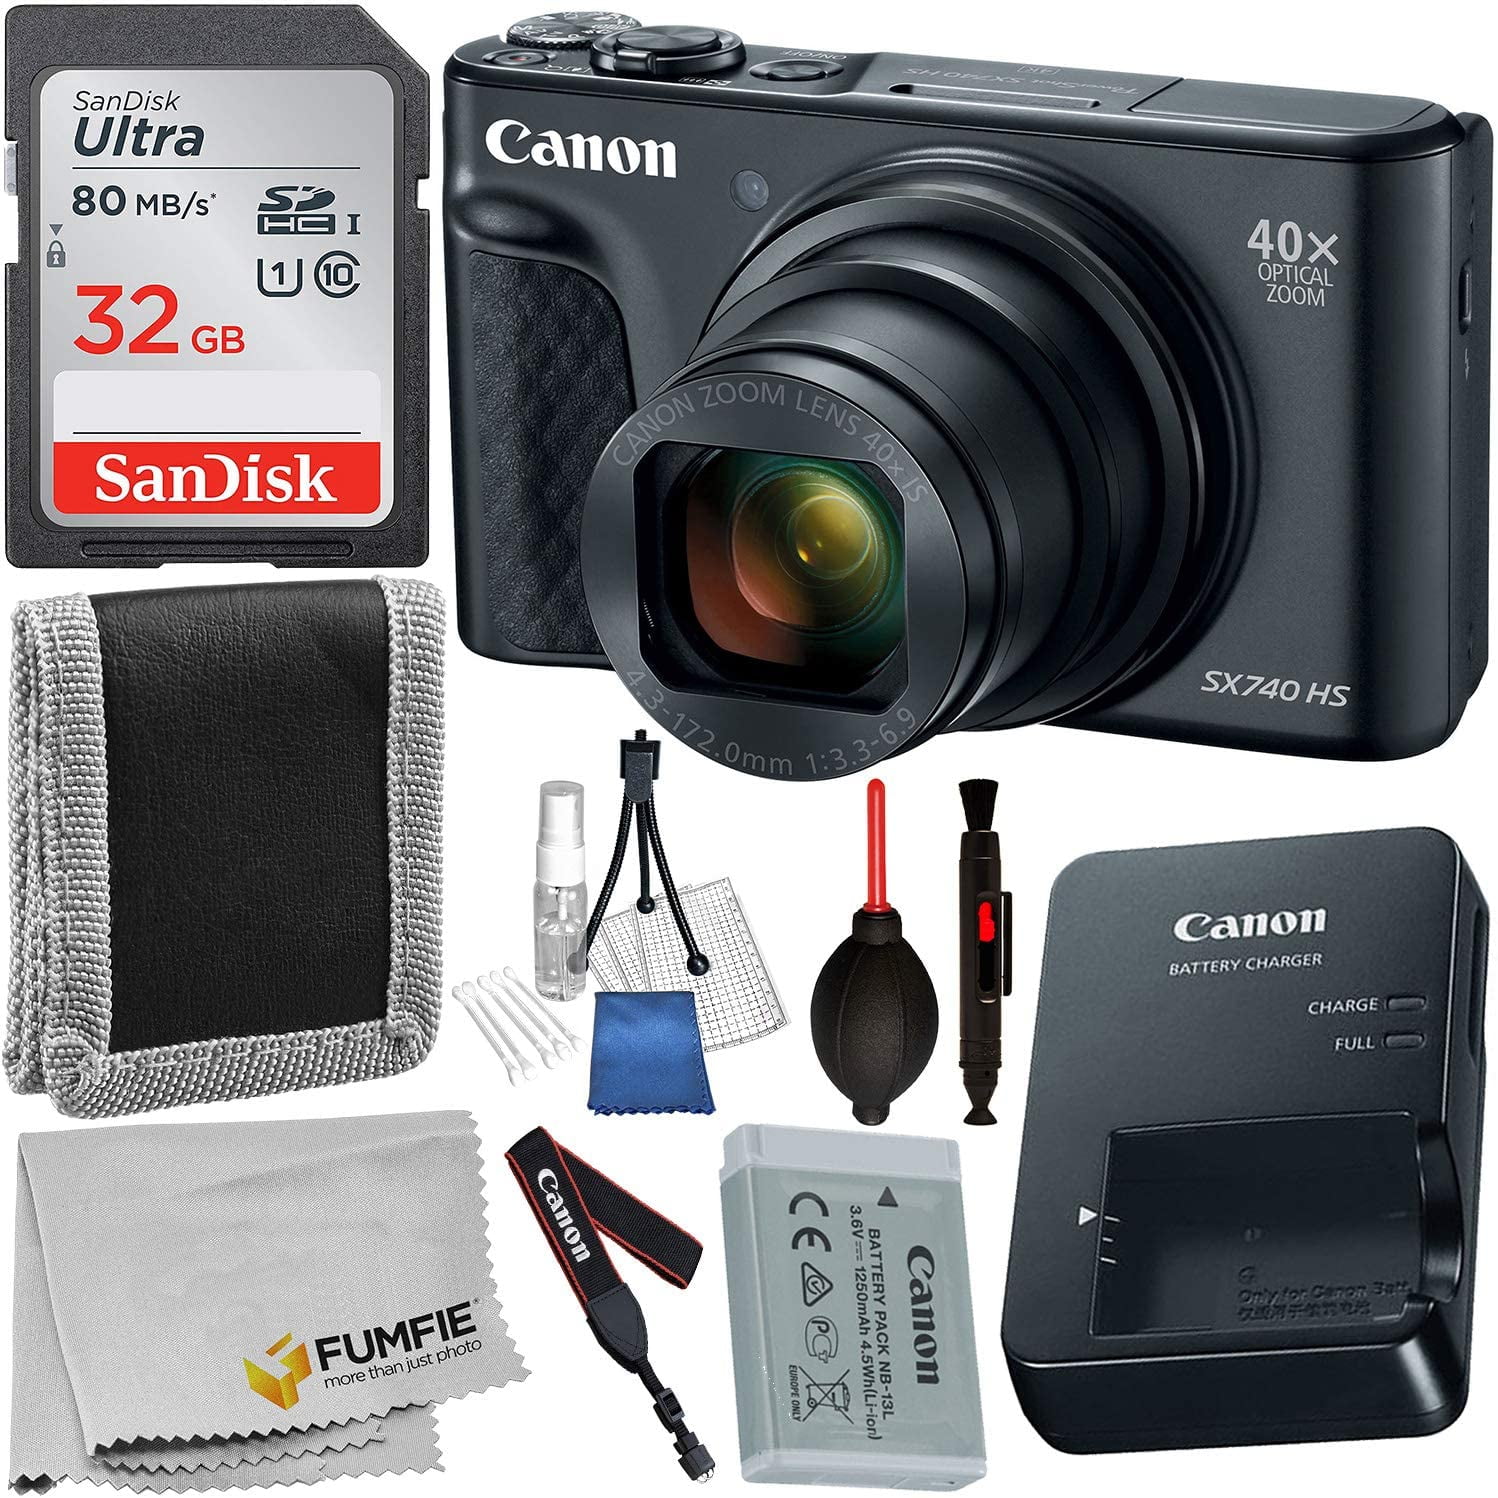 Canon PowerShot SX740 HS Digital Camera (Black) (2955C001) with Starter  Accessory Bundle - Includes: SanDisk Ultra 32GB Memory Card & More